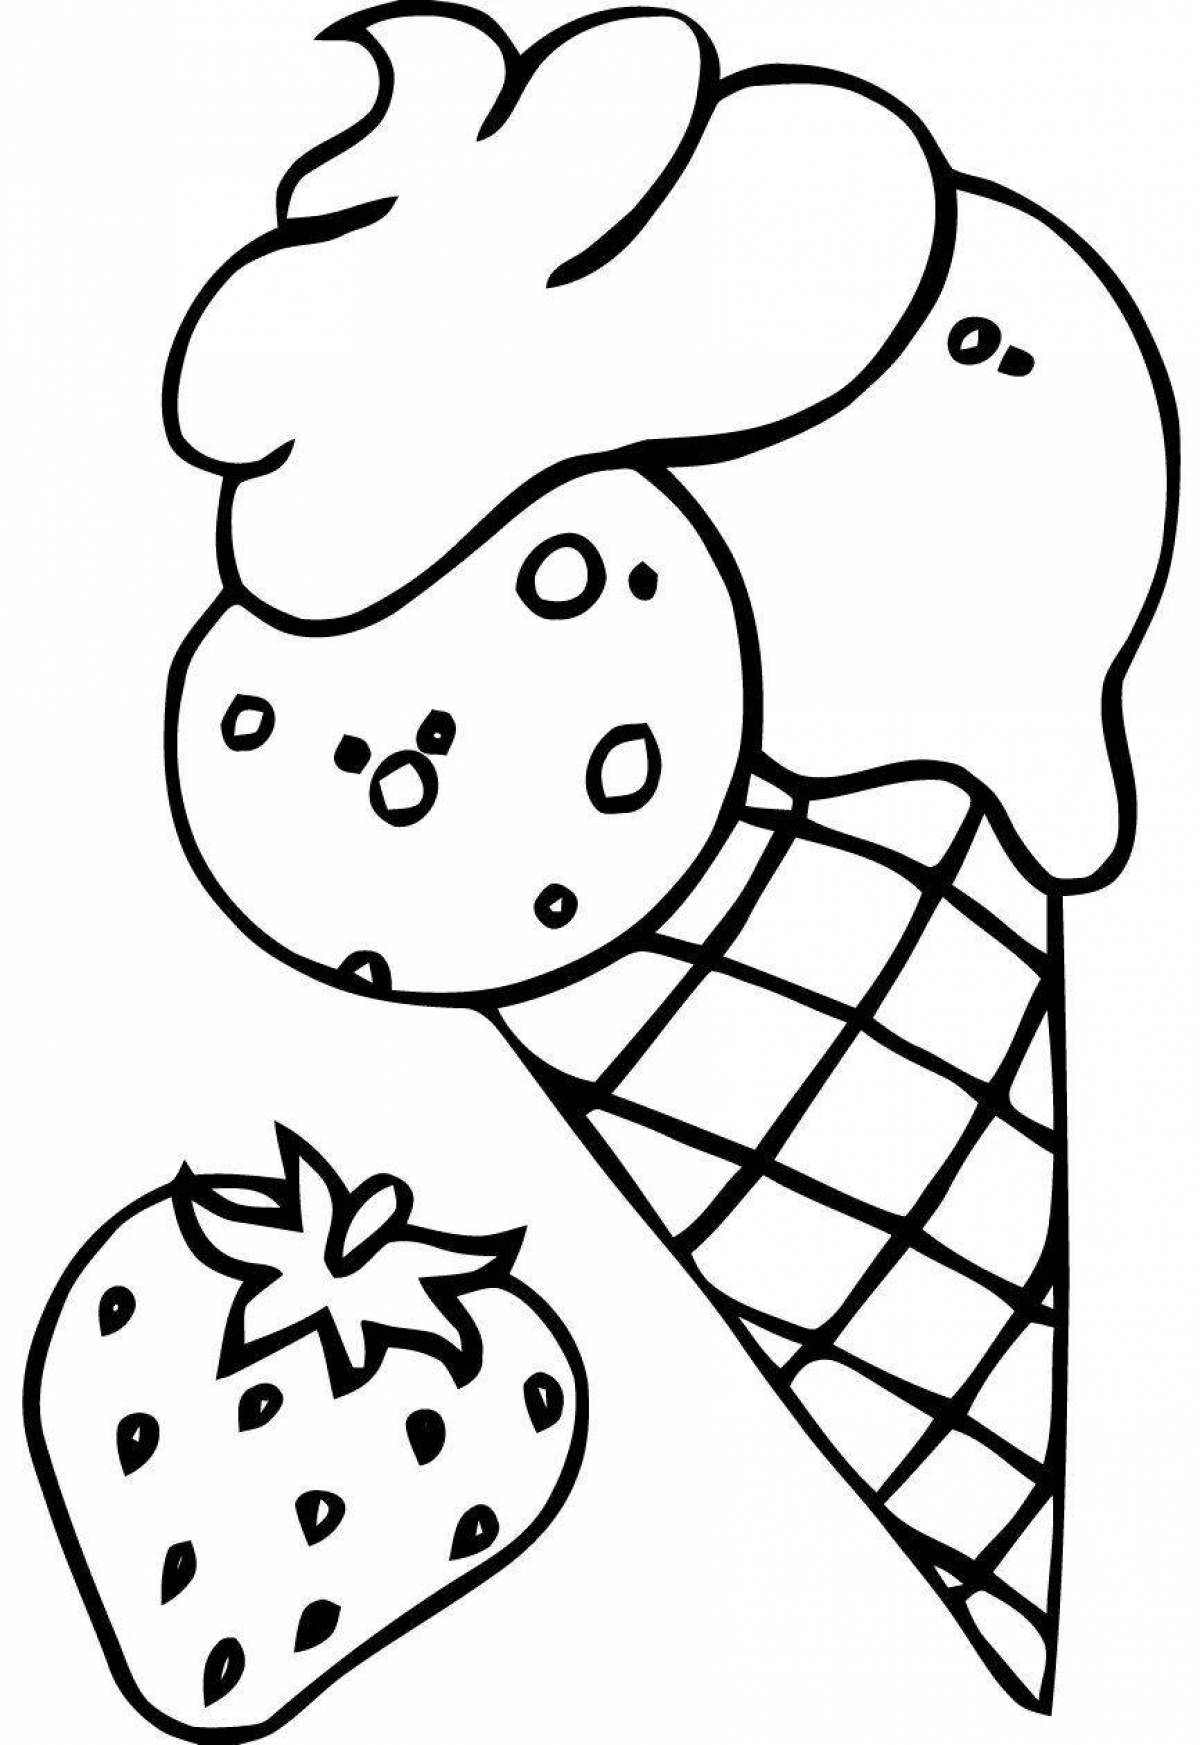 Fabulous ice cream coloring page for babies